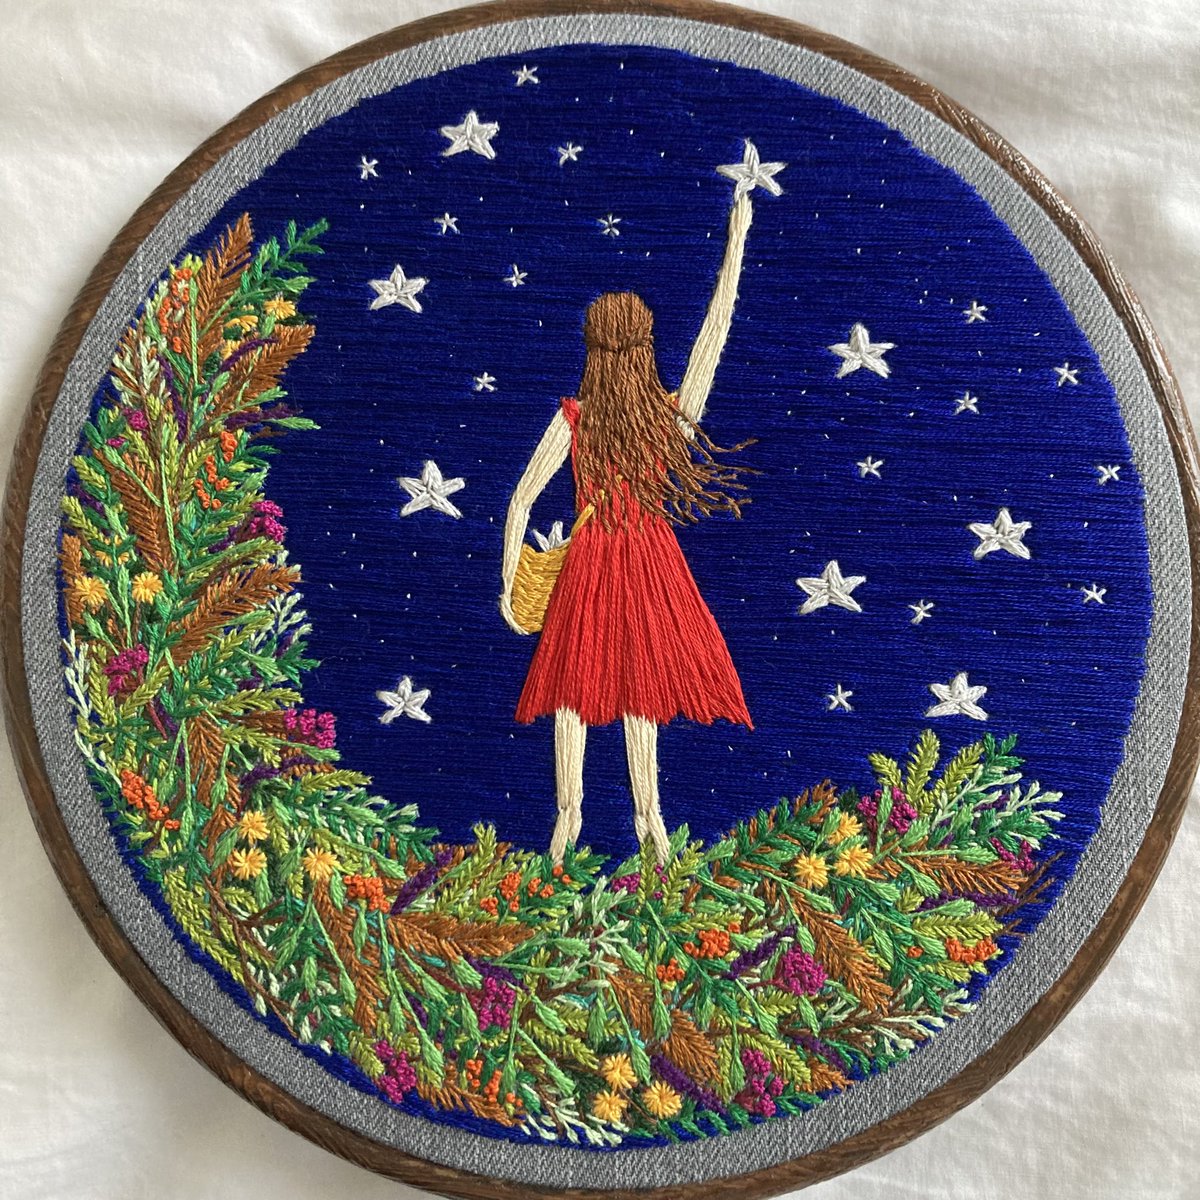 Well the wait is over, my first embroidery of the year is done… a little different, but still very much me, if that makes any sense? 😅 I’m off to stare at it for a while… 🧵🌿 🪡 ✨
*all freehand stitched without patterns or paint, just threads #stitchedart #thesewingsongbird